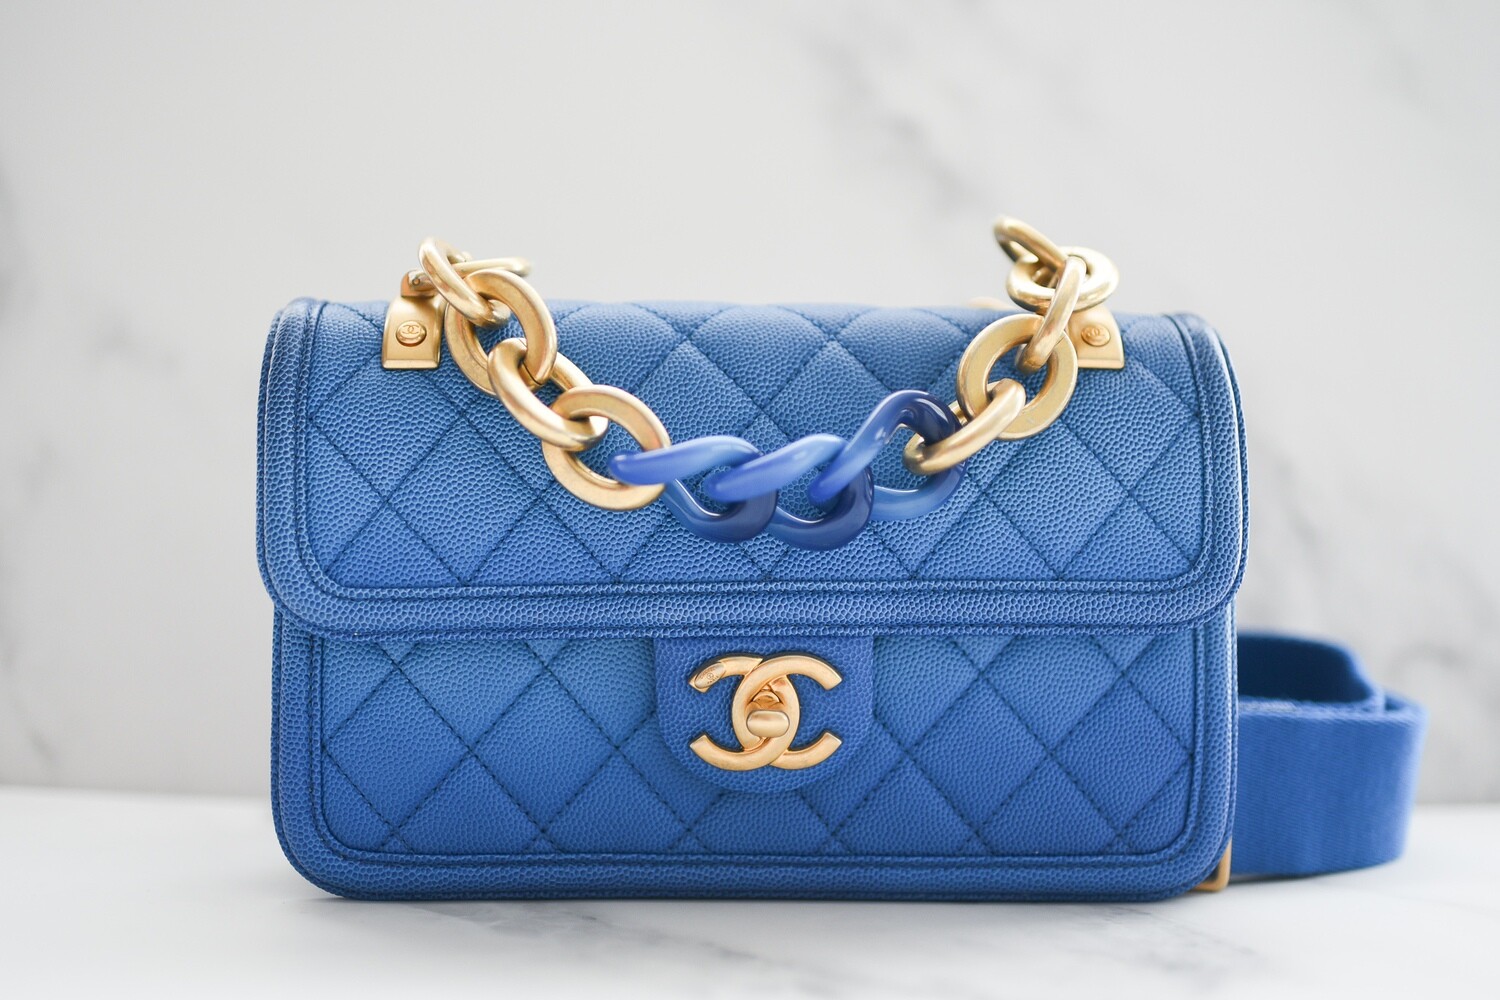 Chanel Sunset By The Sea Bag, Blue Ombre Caviar With Gold Hardware, Mini,  Preowned In Dustbag Ga002